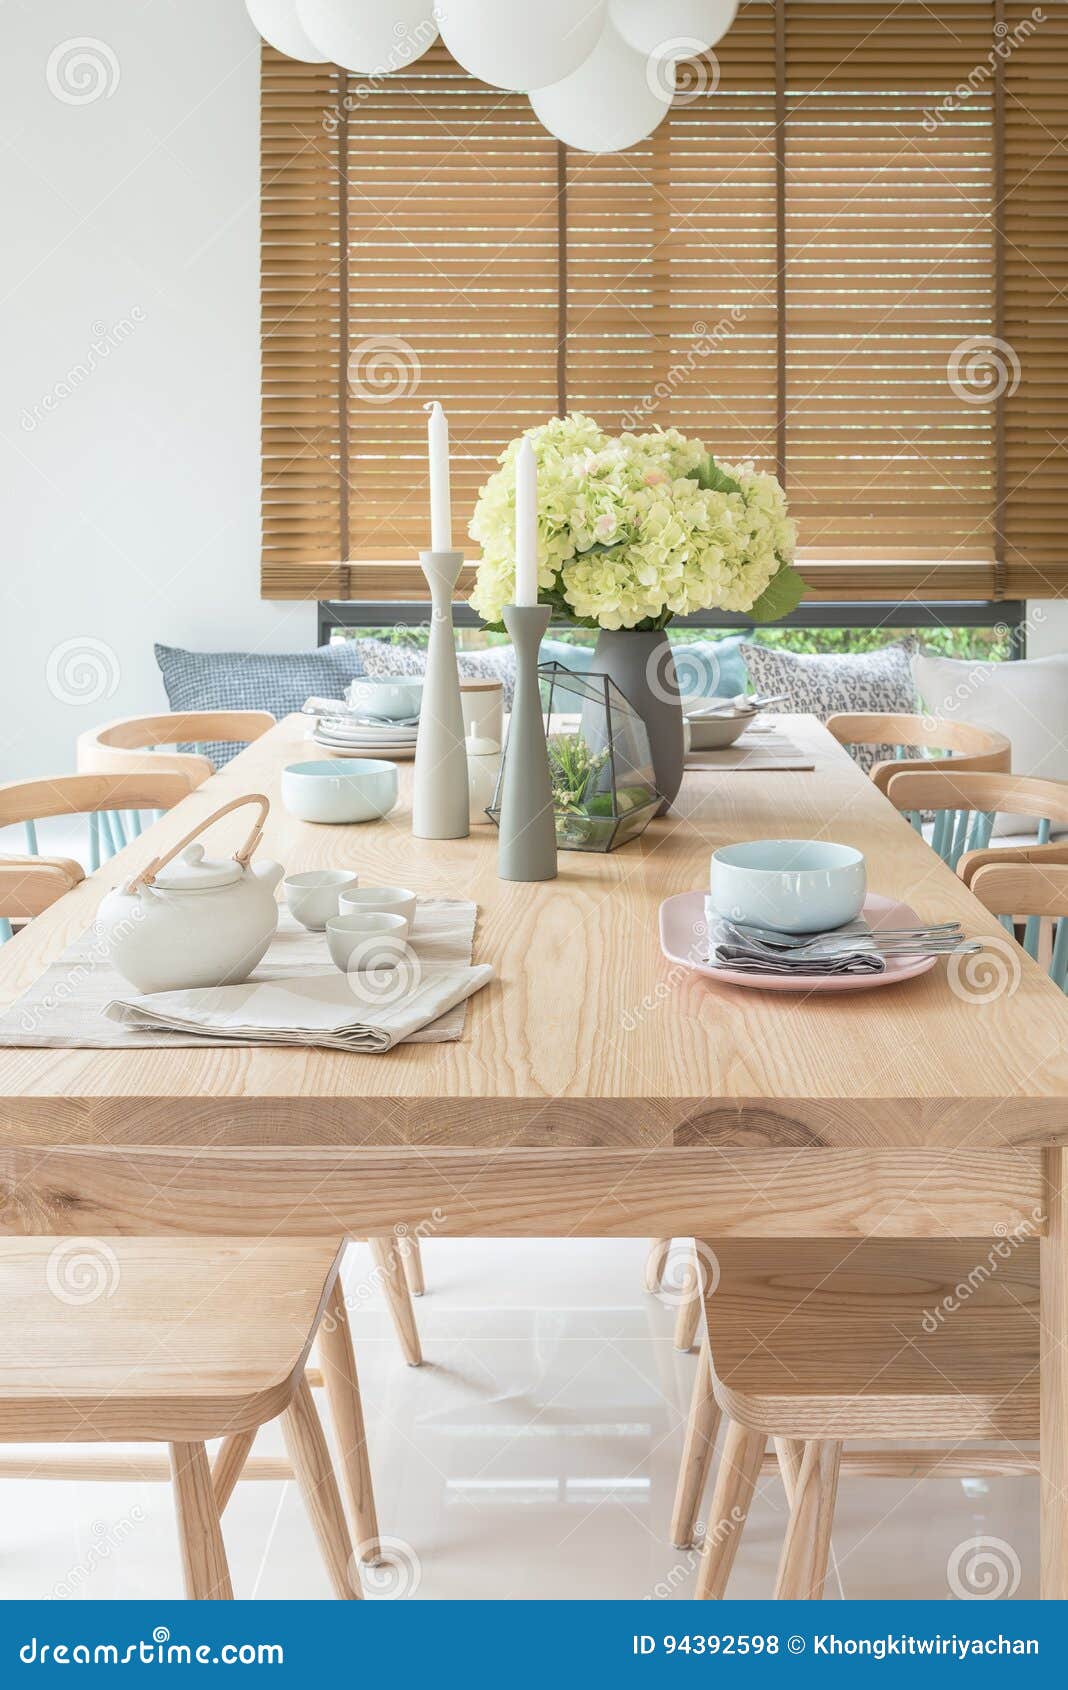 Wooden Dining Table In Modern Dining Room With Table Set And Vase Of Plants Stock Photo Image Of Home Dinning 94392598